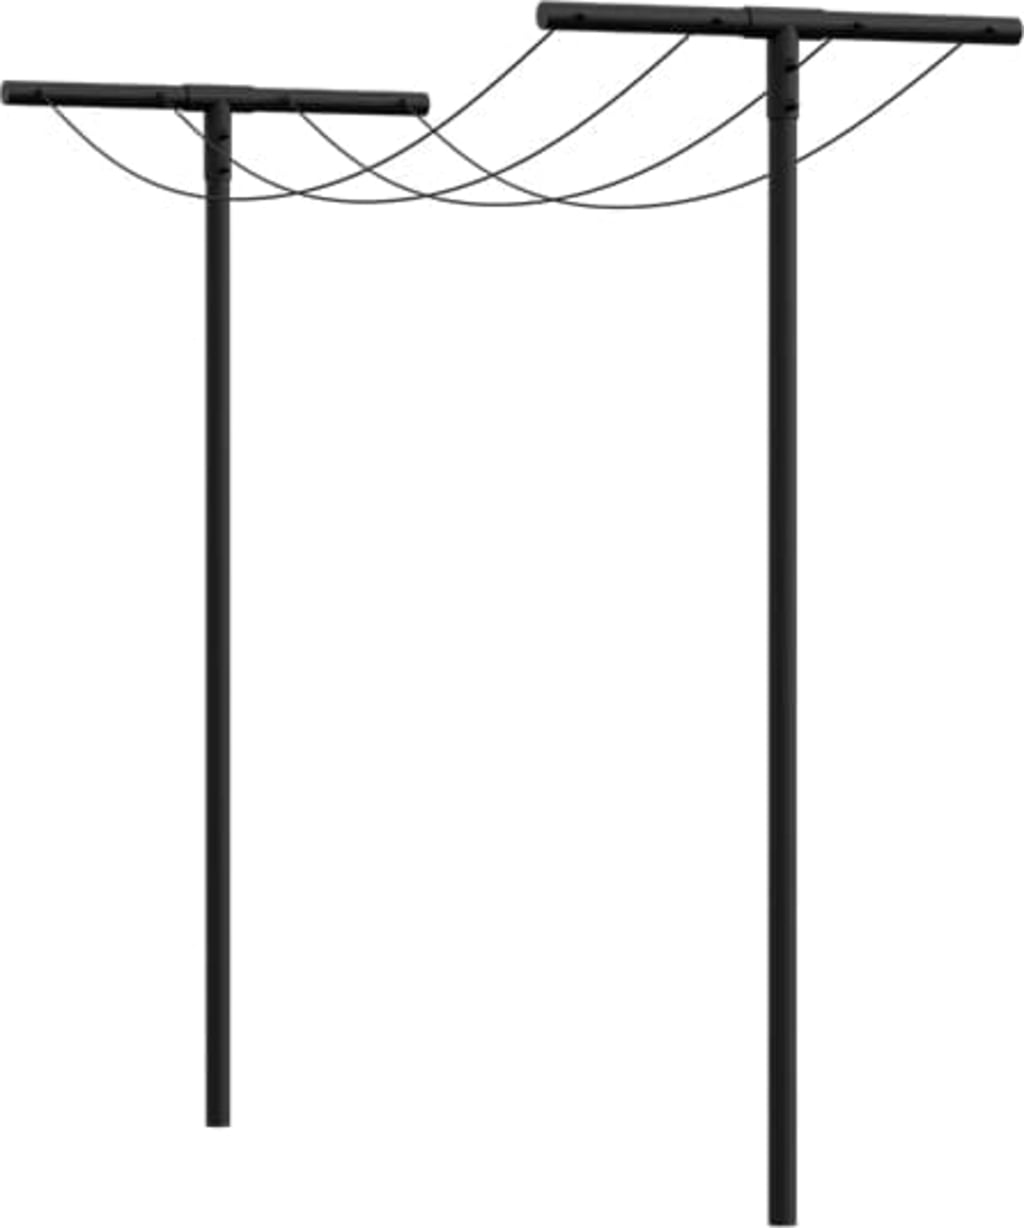 PLUS A/S Clothesline Poles, Tubular Steel with Clothesline and Fittings, 1  set - Interismo